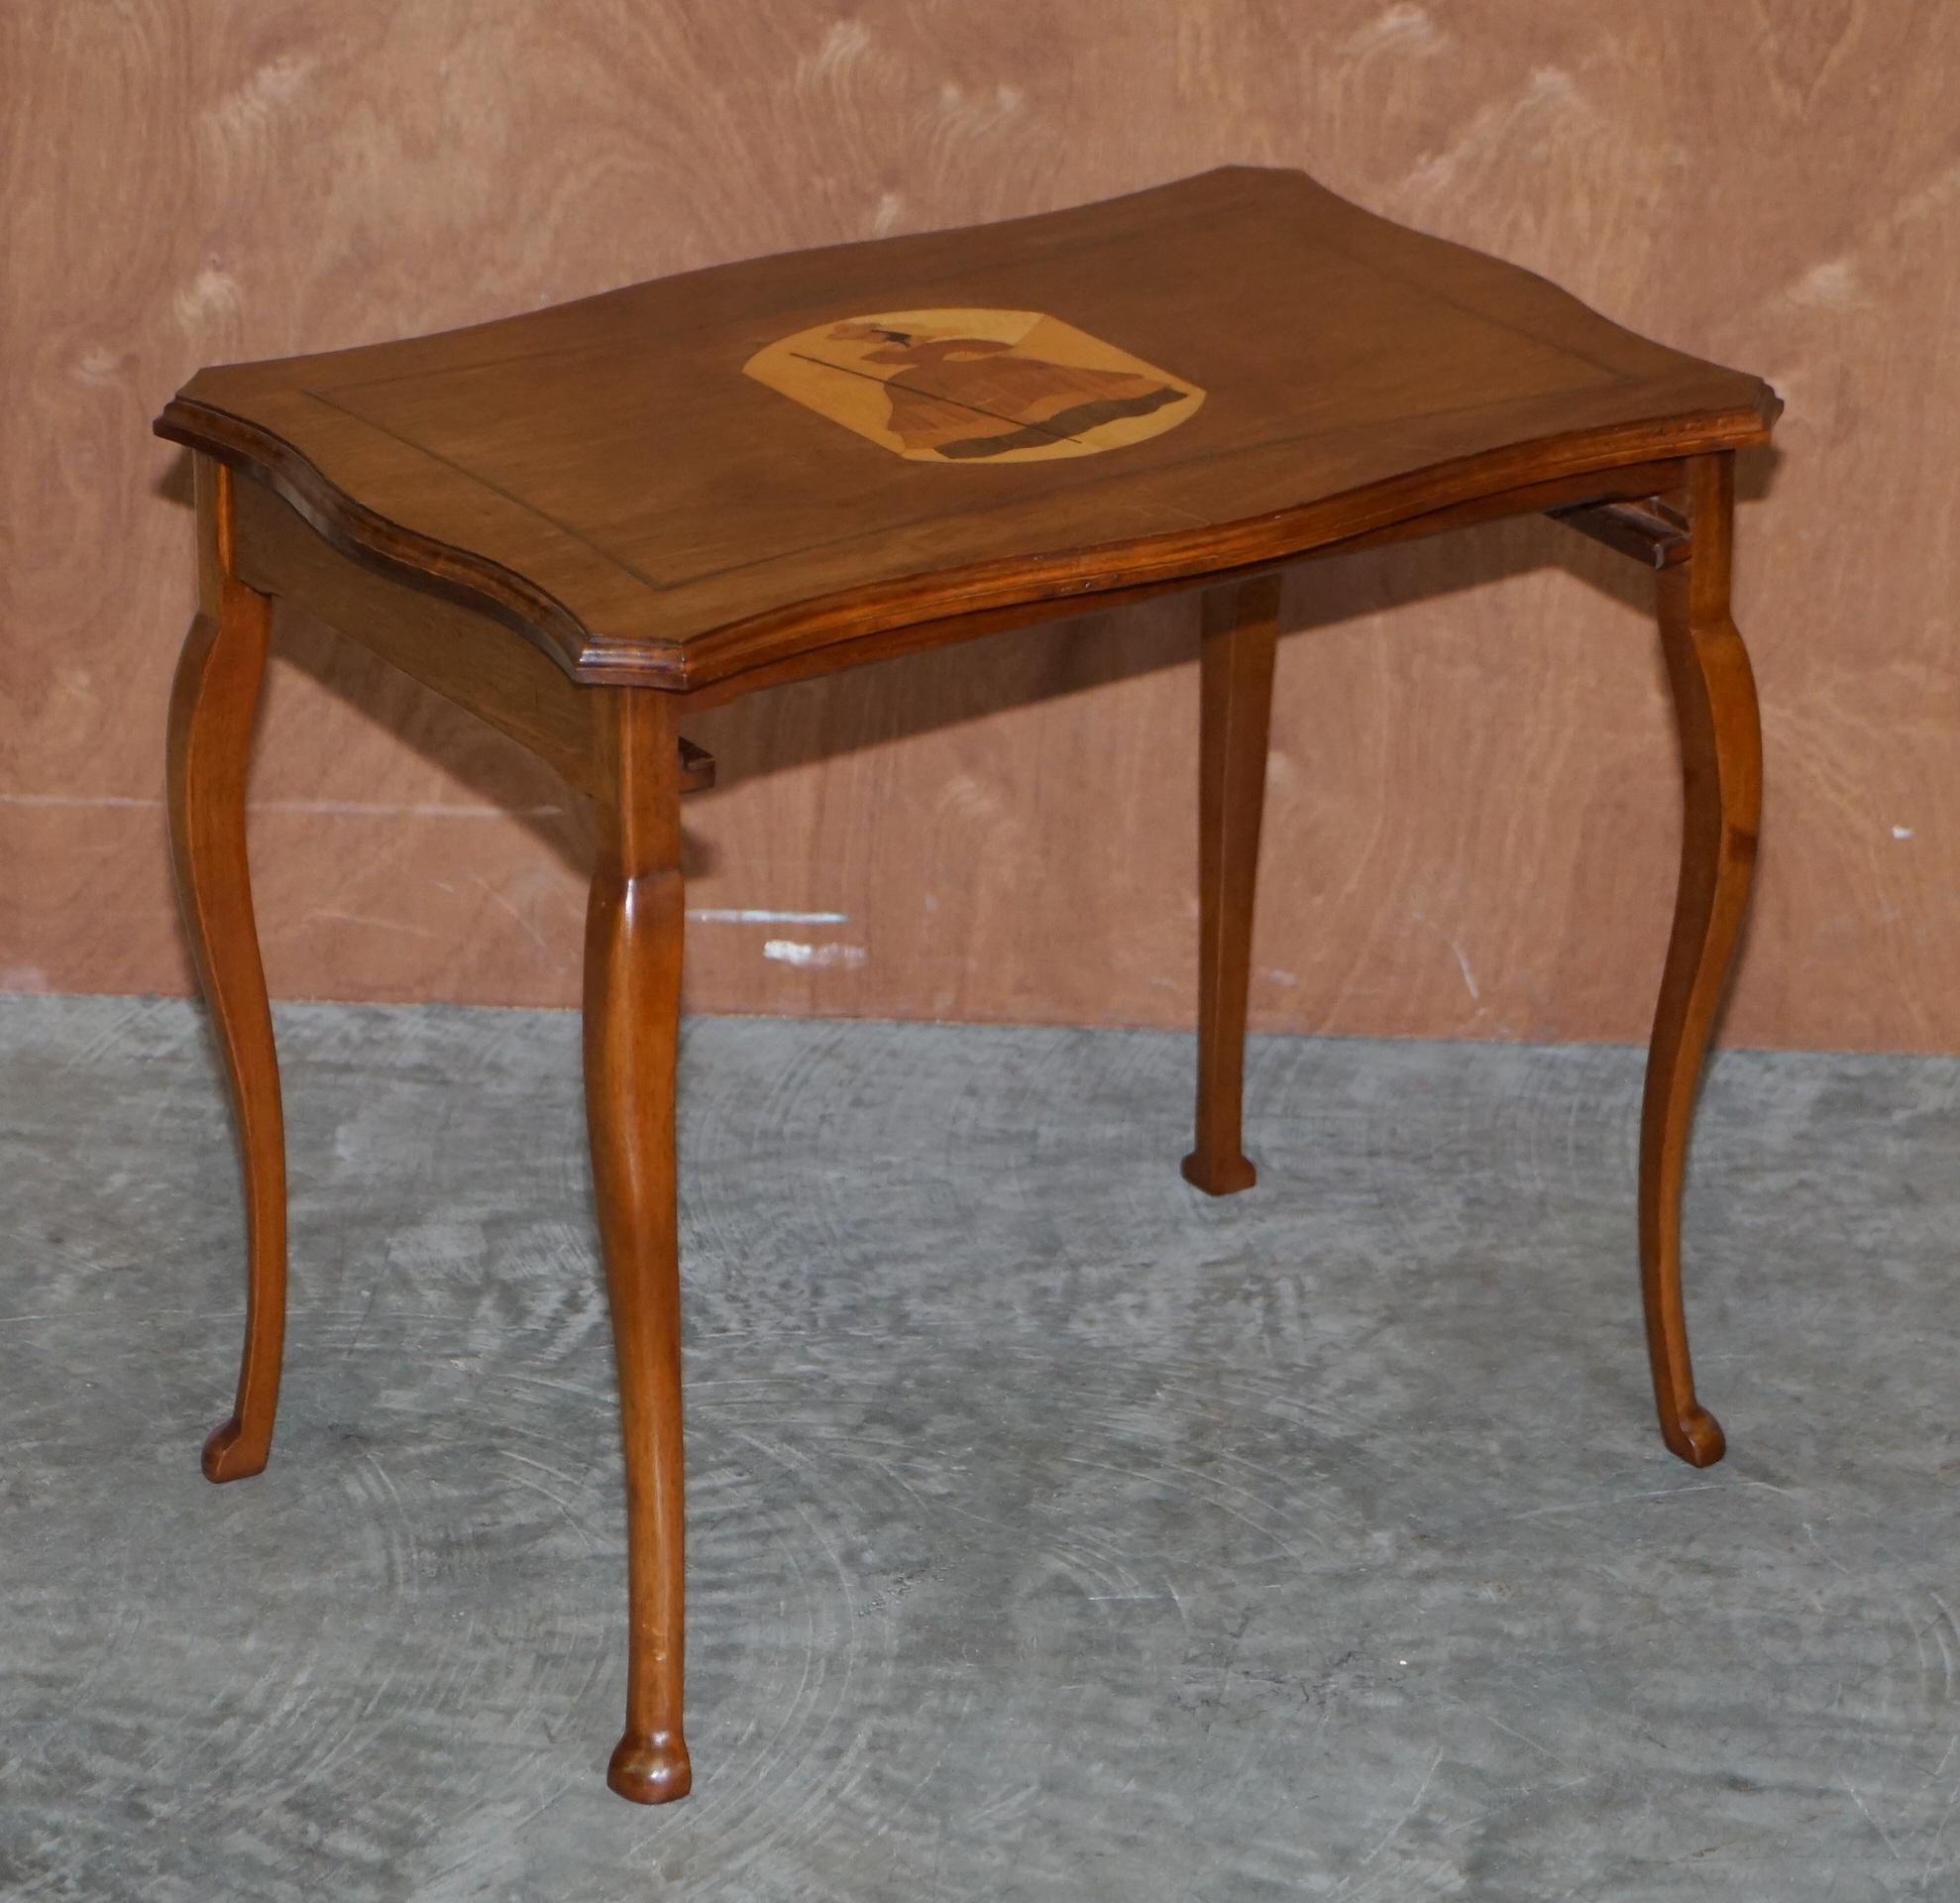 Country Vintage Nest of Tables with Hand Painted Marquetry Inlaid Tops Very Decorative For Sale